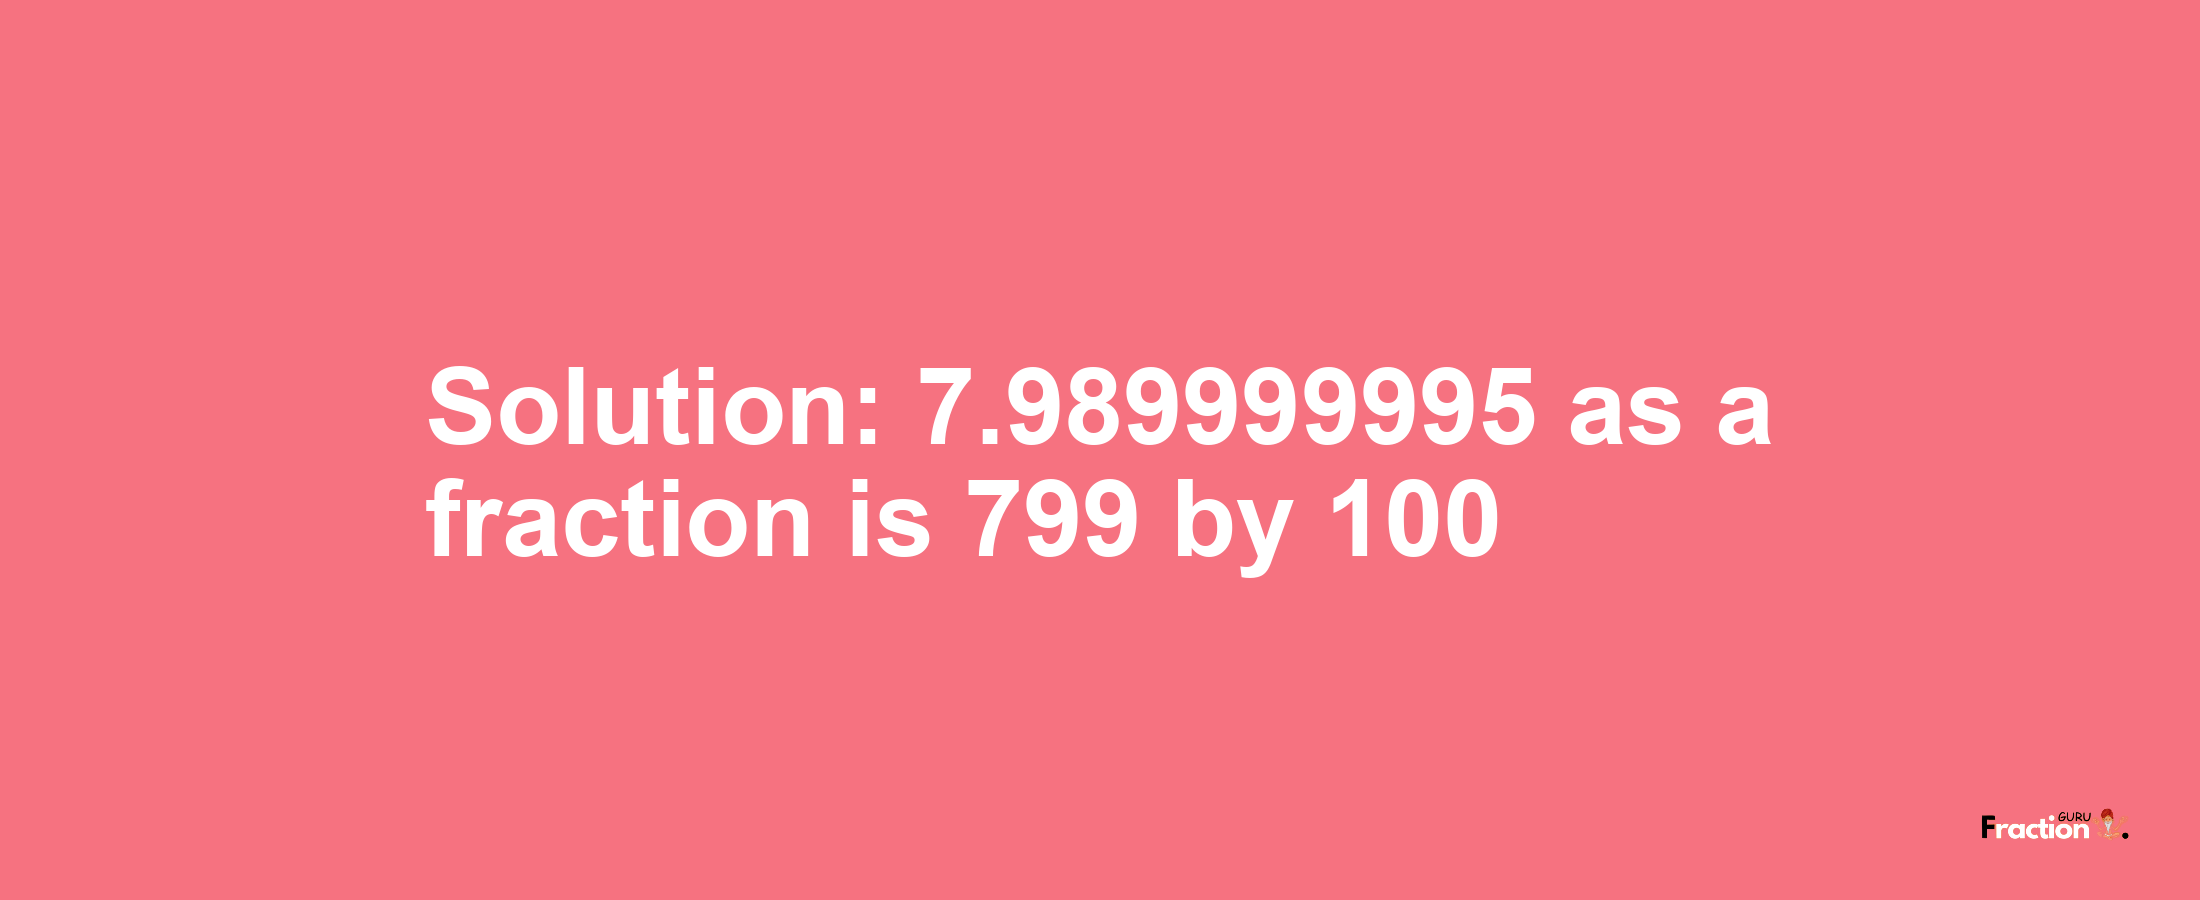 Solution:7.989999995 as a fraction is 799/100